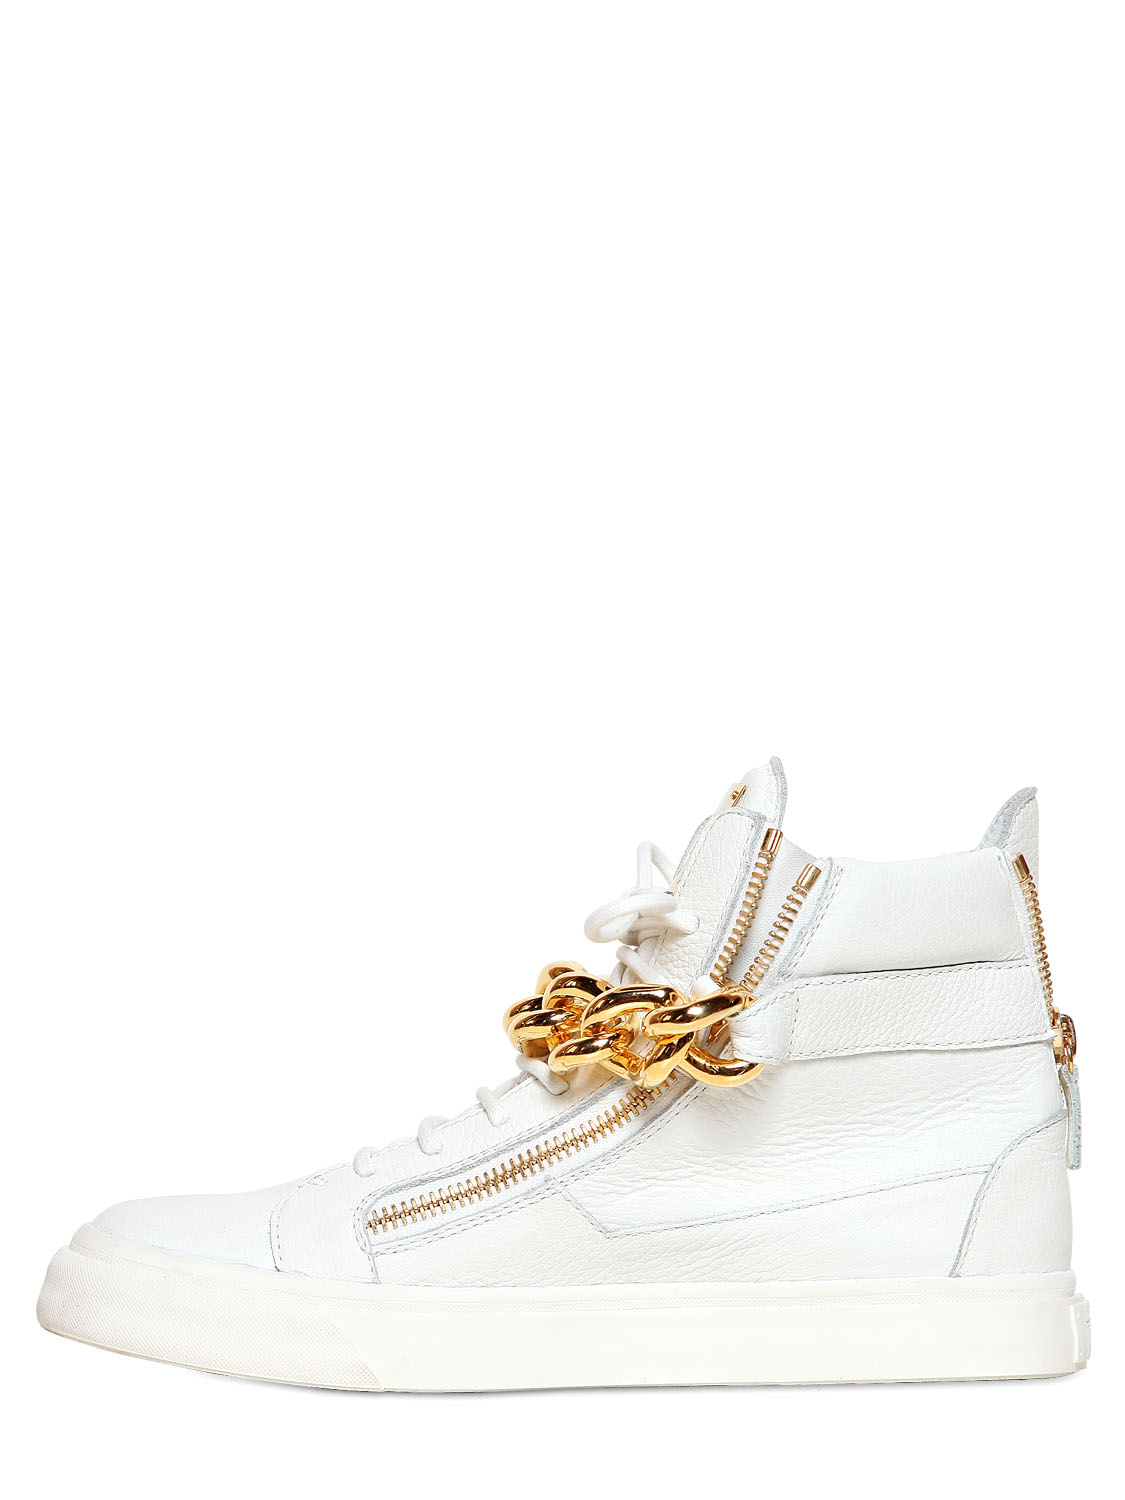 Lyst - Giuseppe Zanotti Metal Chain Leather High Top Sneakers in White ...